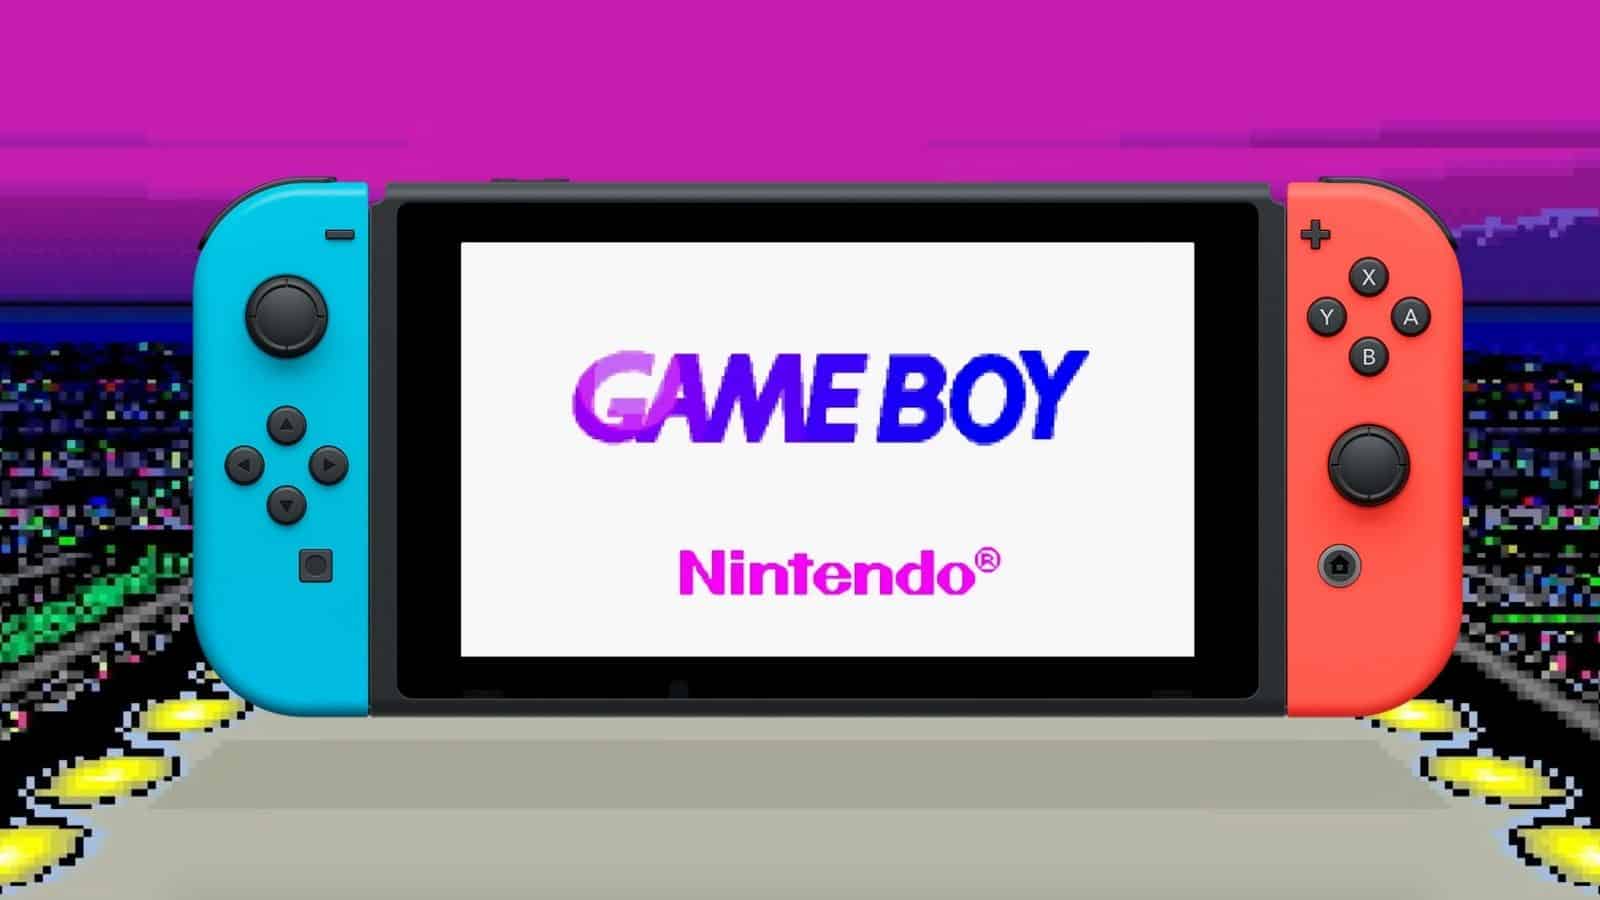 Nintendo's official Game Boy Advance emulator for Switch leaks